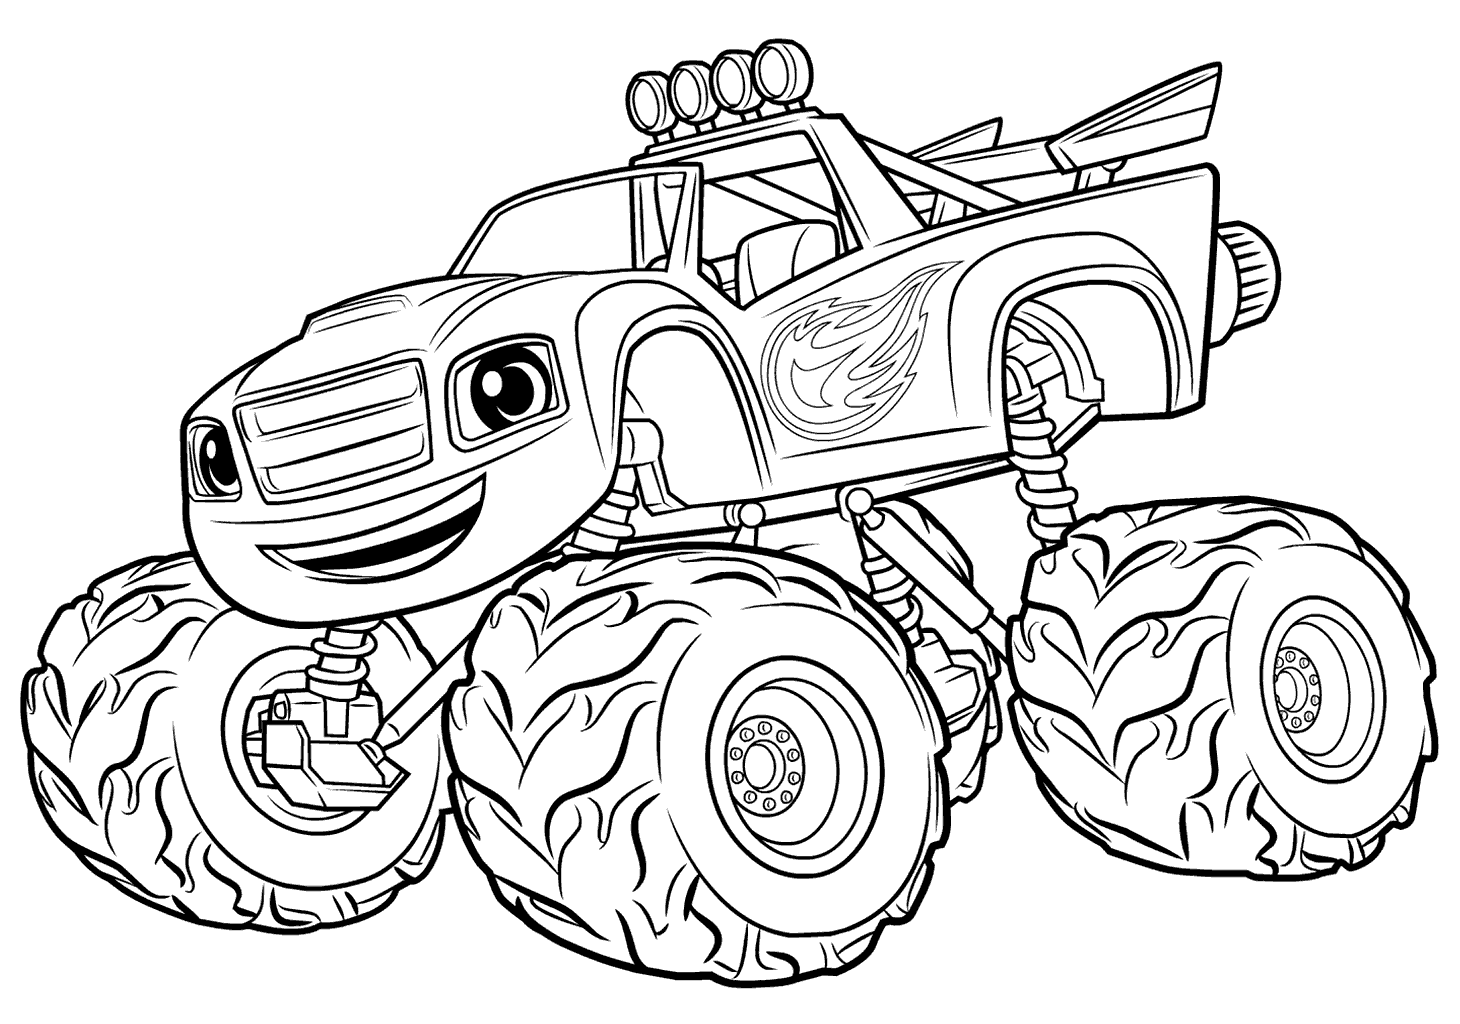 Blaze and the Monster Machines Coloring Pages Best Coloring Pages For